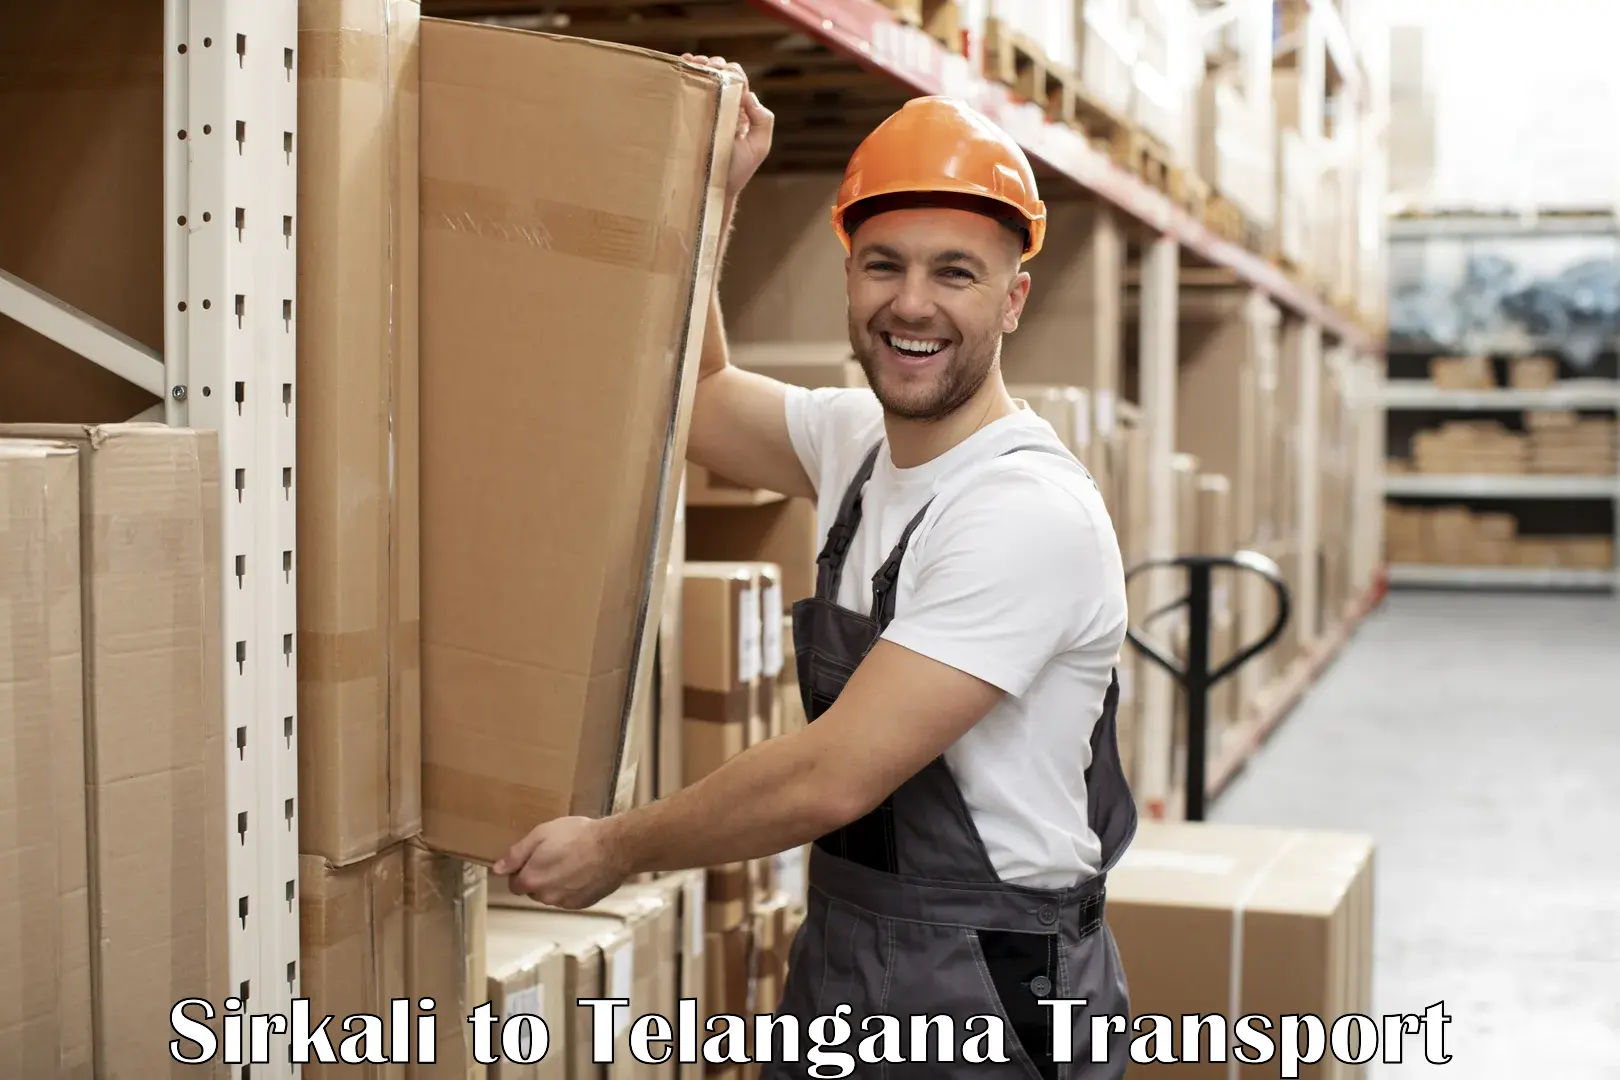 Container transport service Sirkali to Telangana